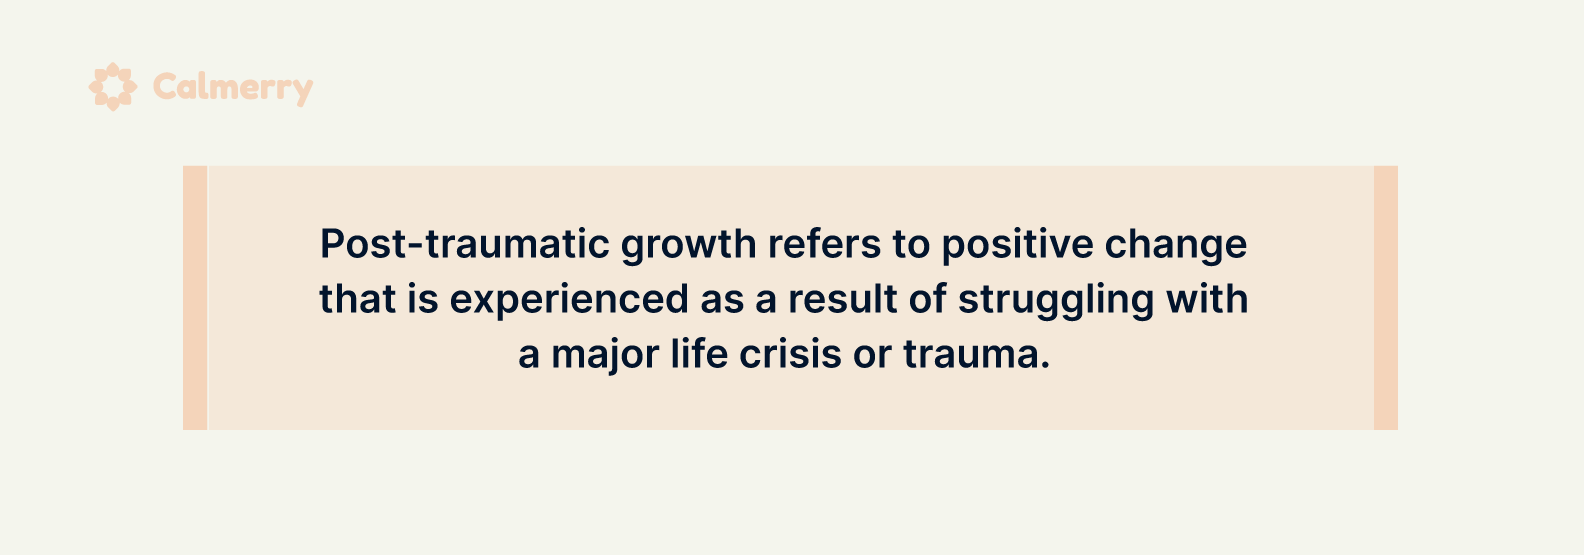 Post-traumatic growth refers to positive change